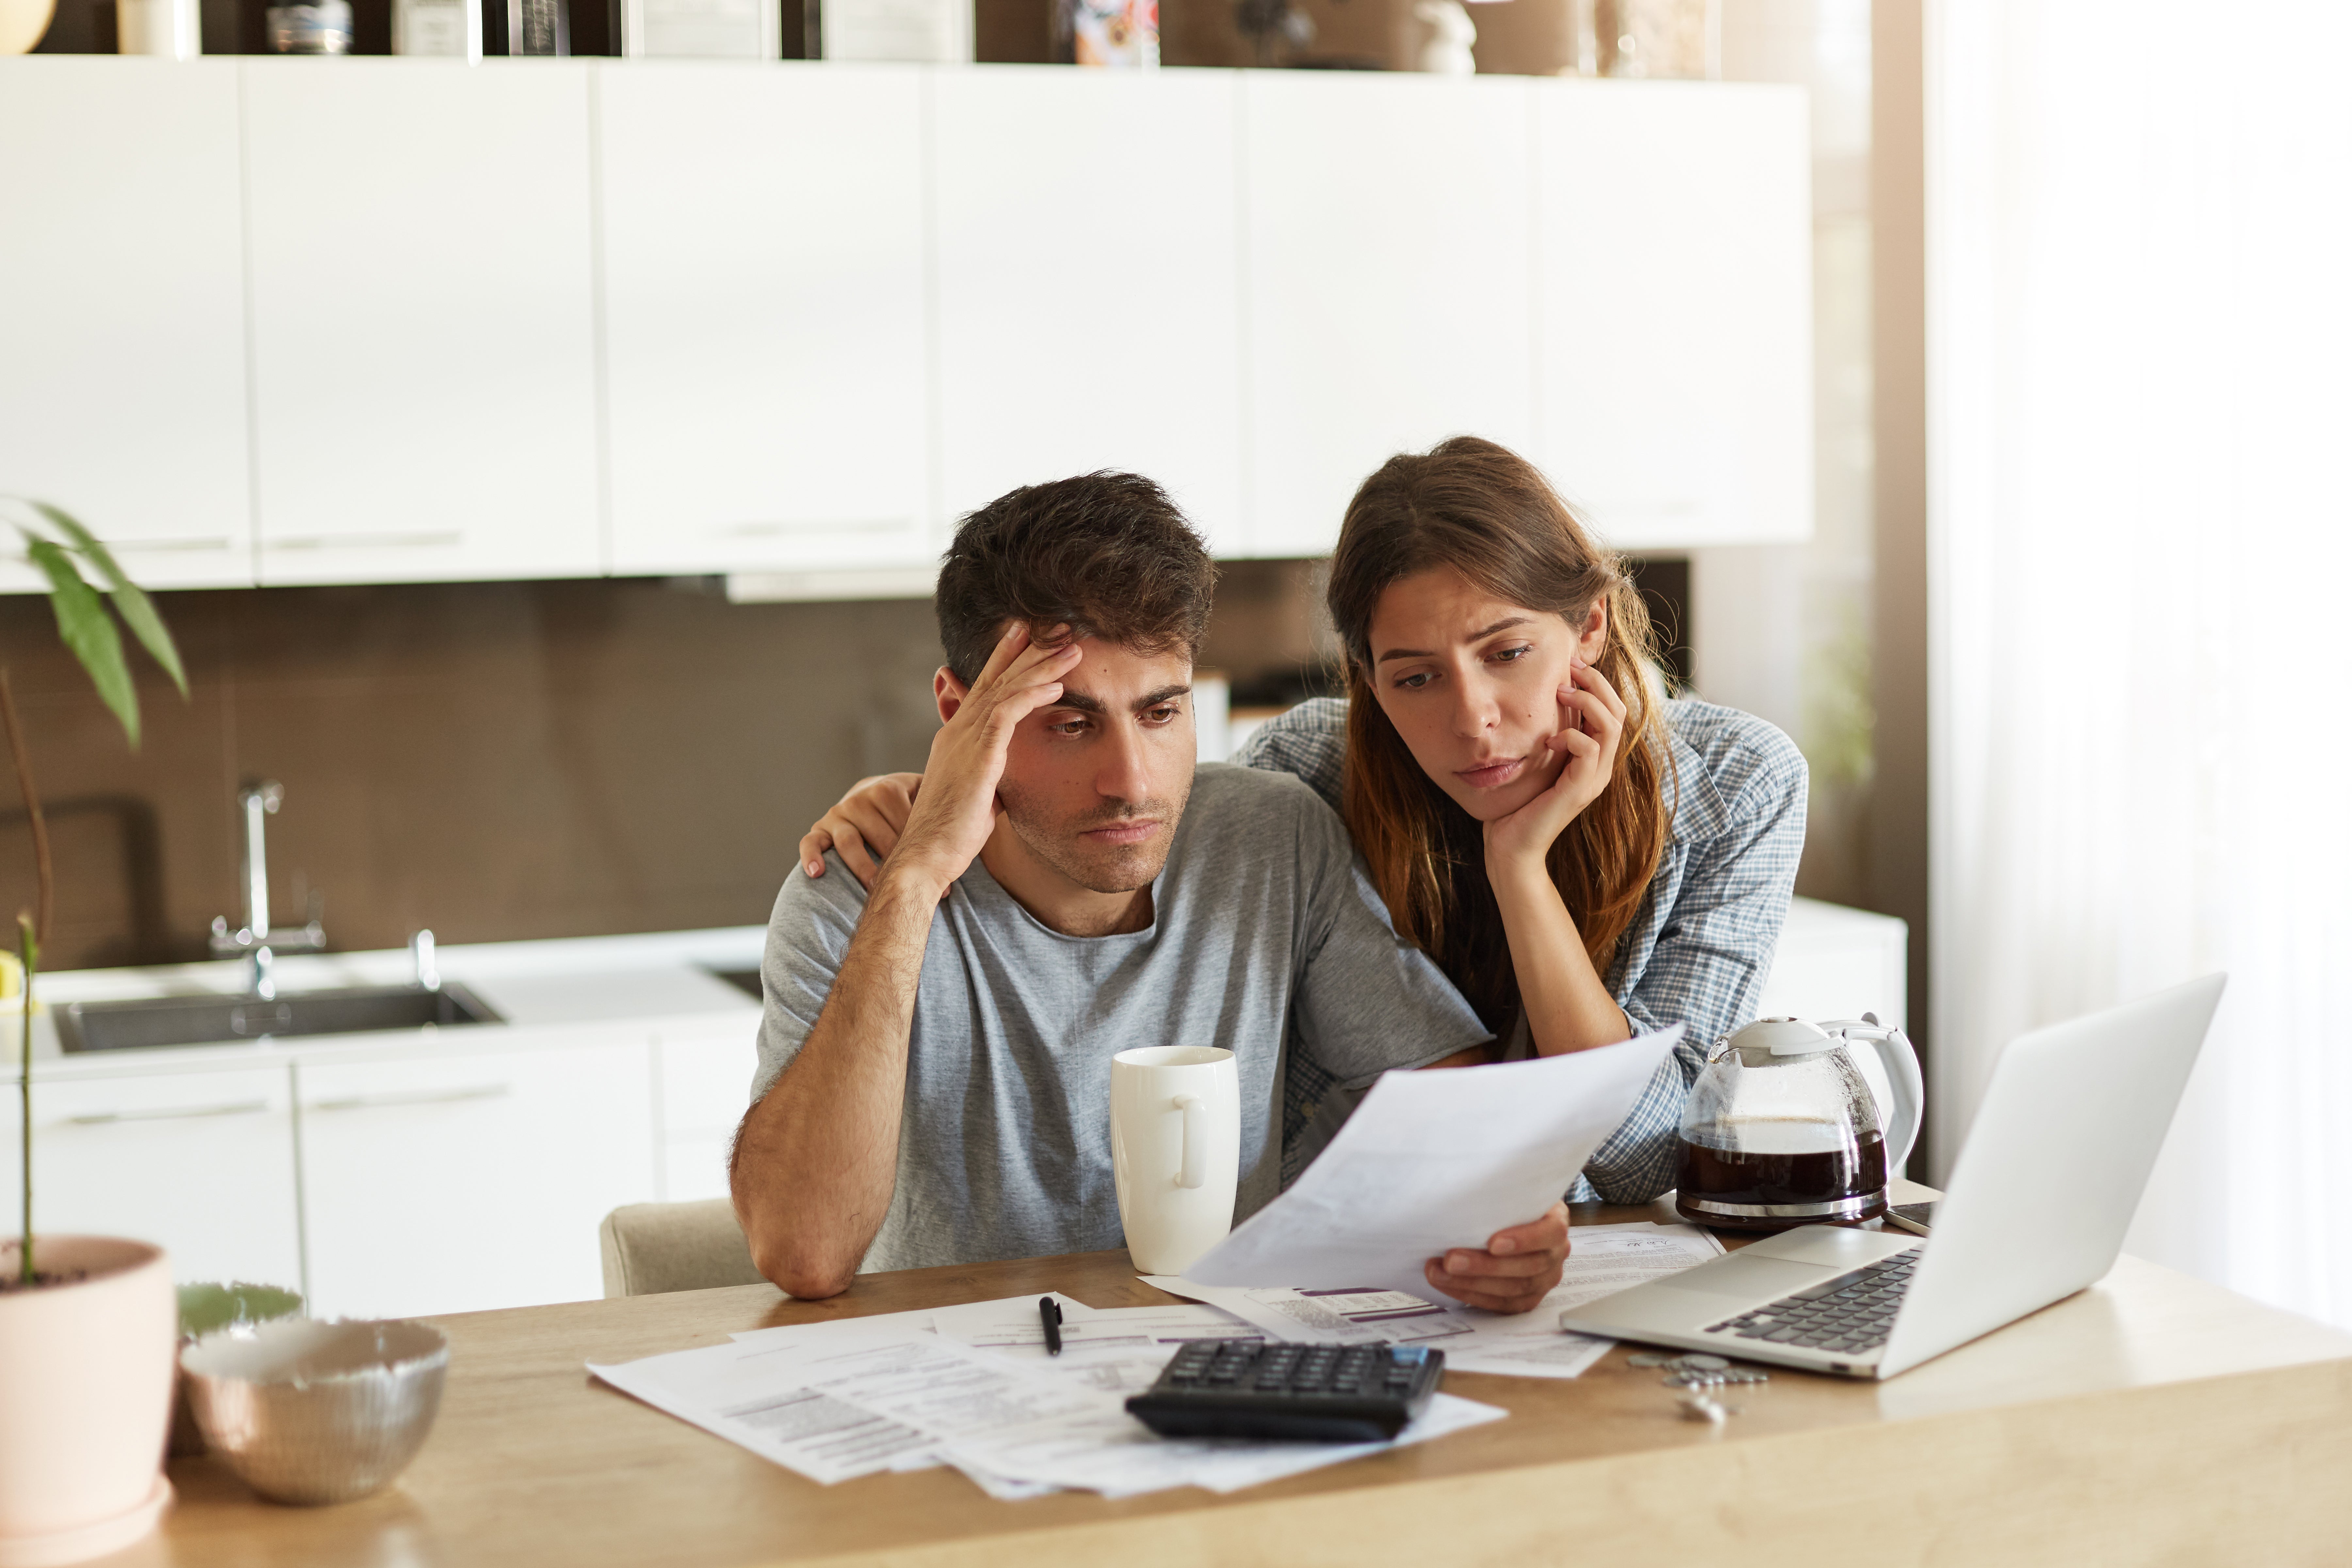 How Long Does Bankruptcy Stay on Your Credit Report?